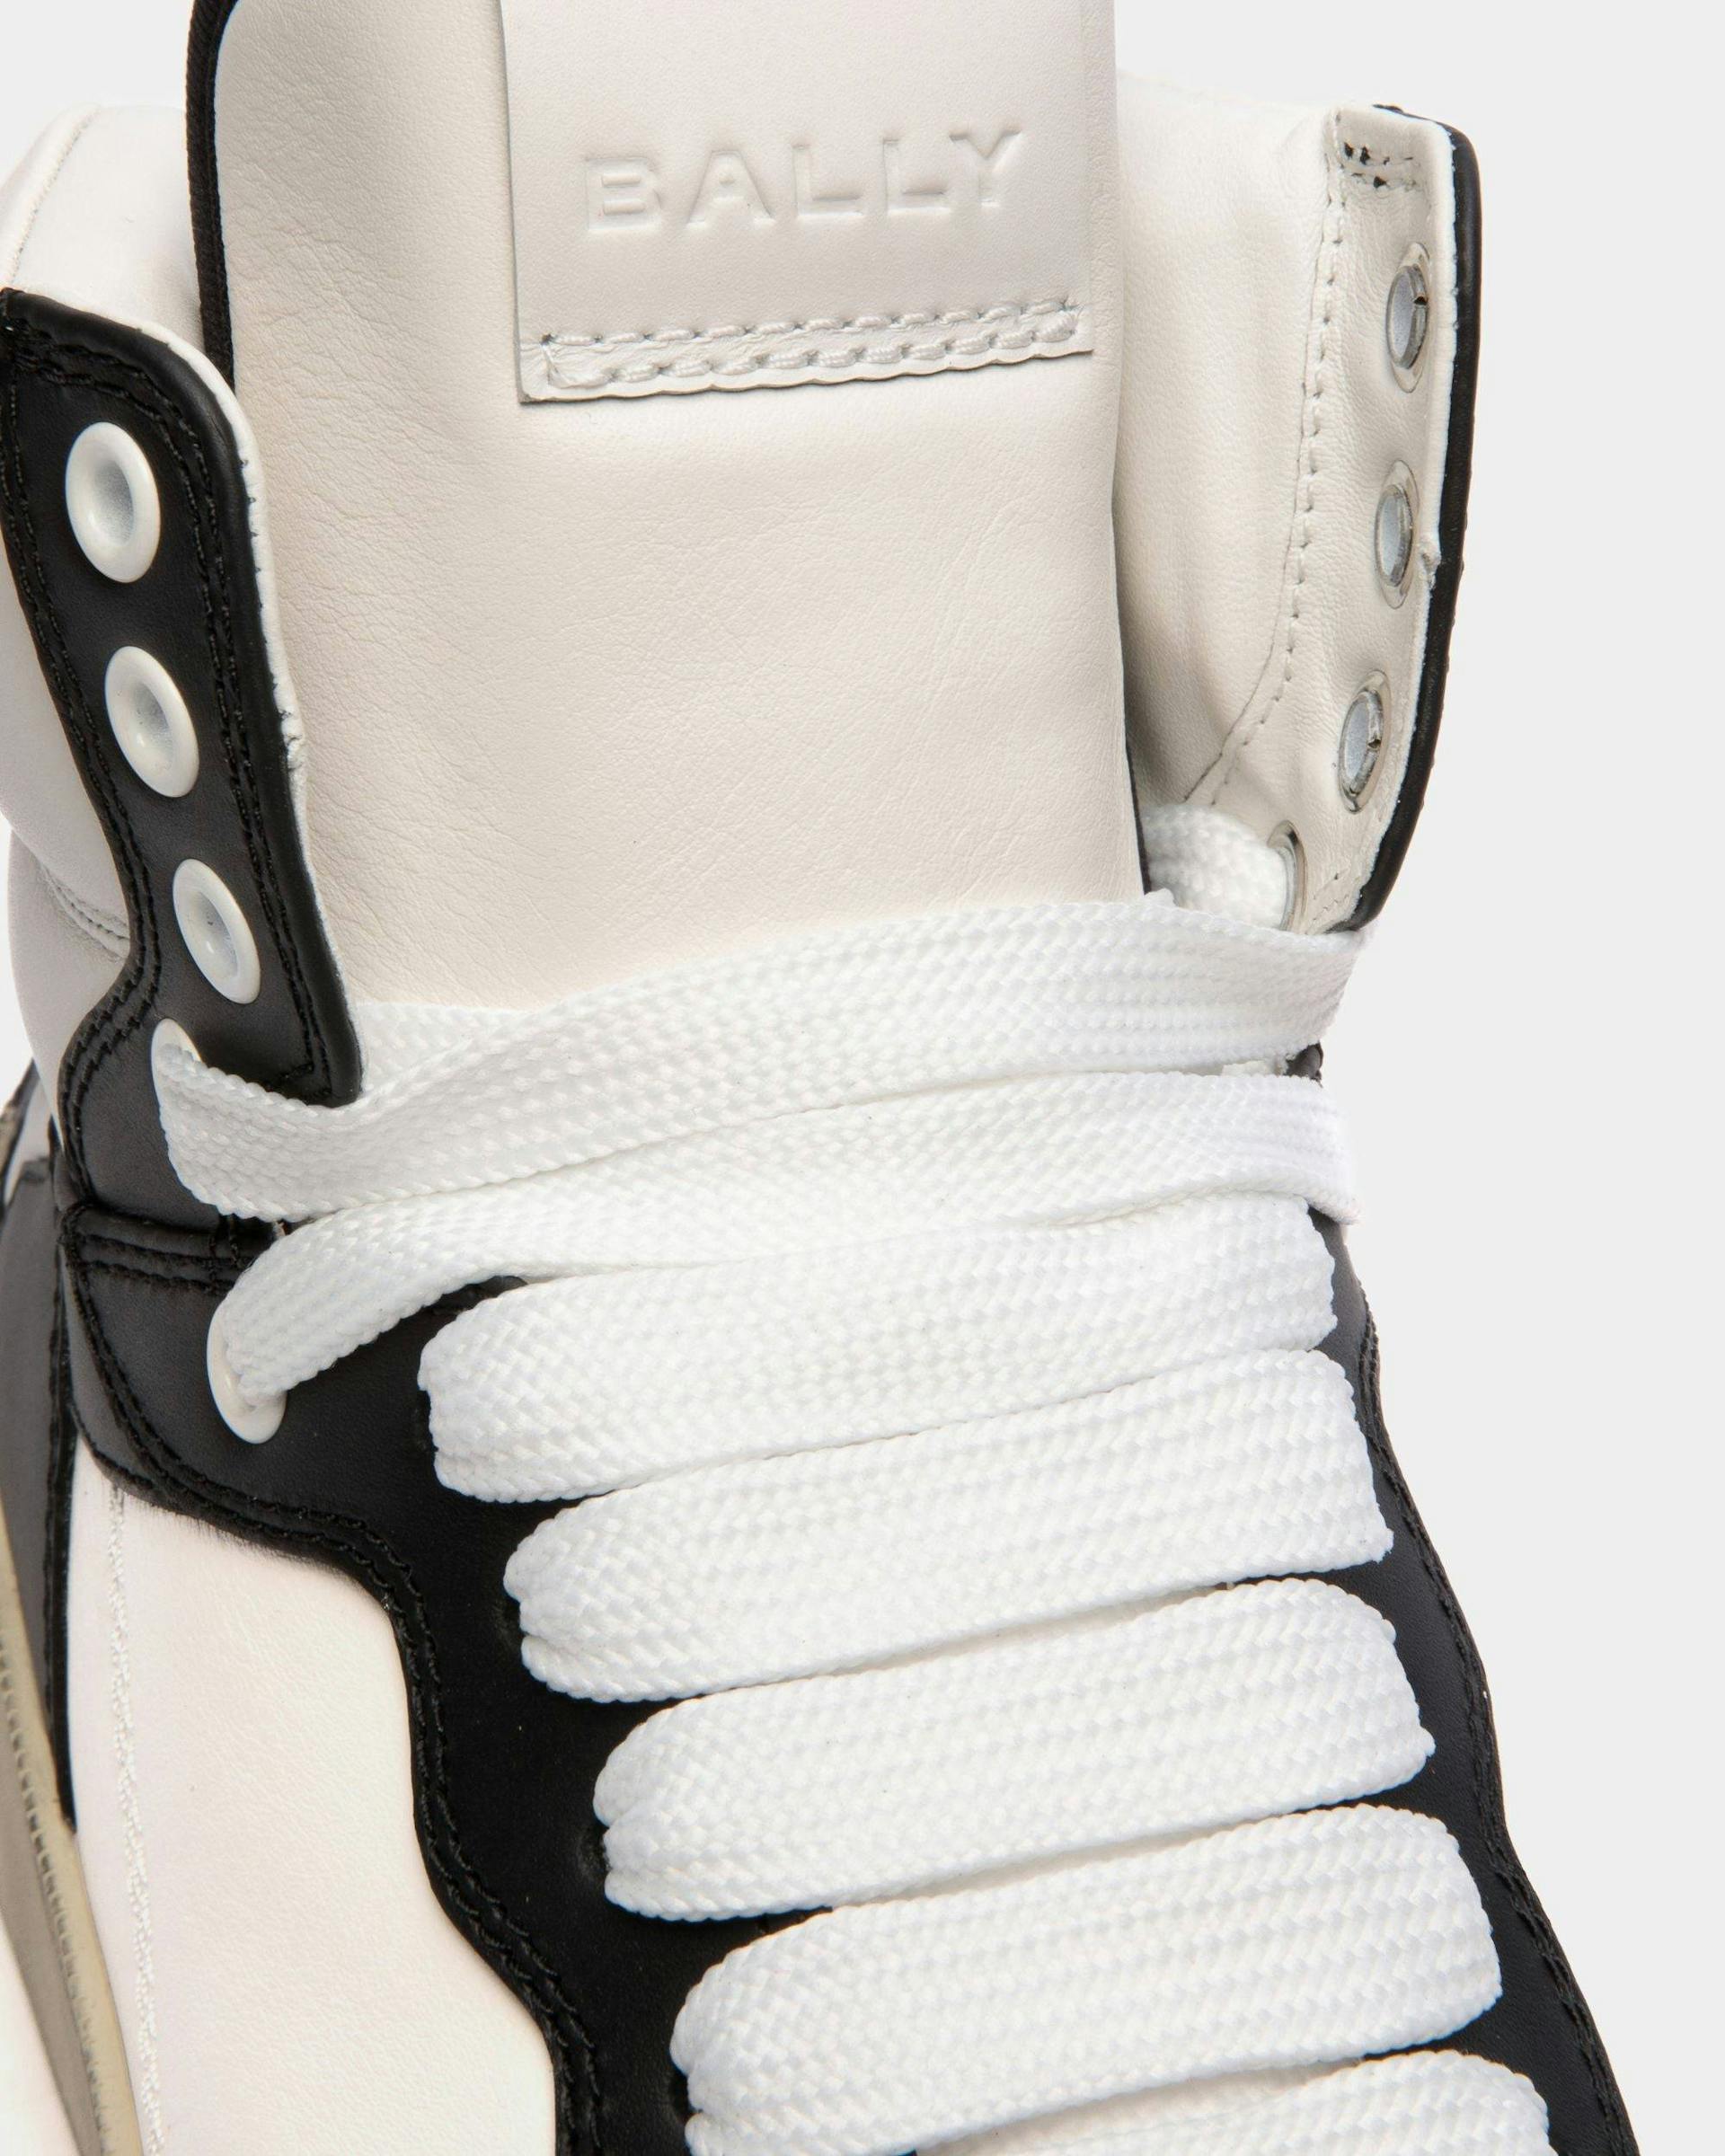 Men's Raise High-Top Sneaker in Black And White Leather | Bally | Still Life Detail